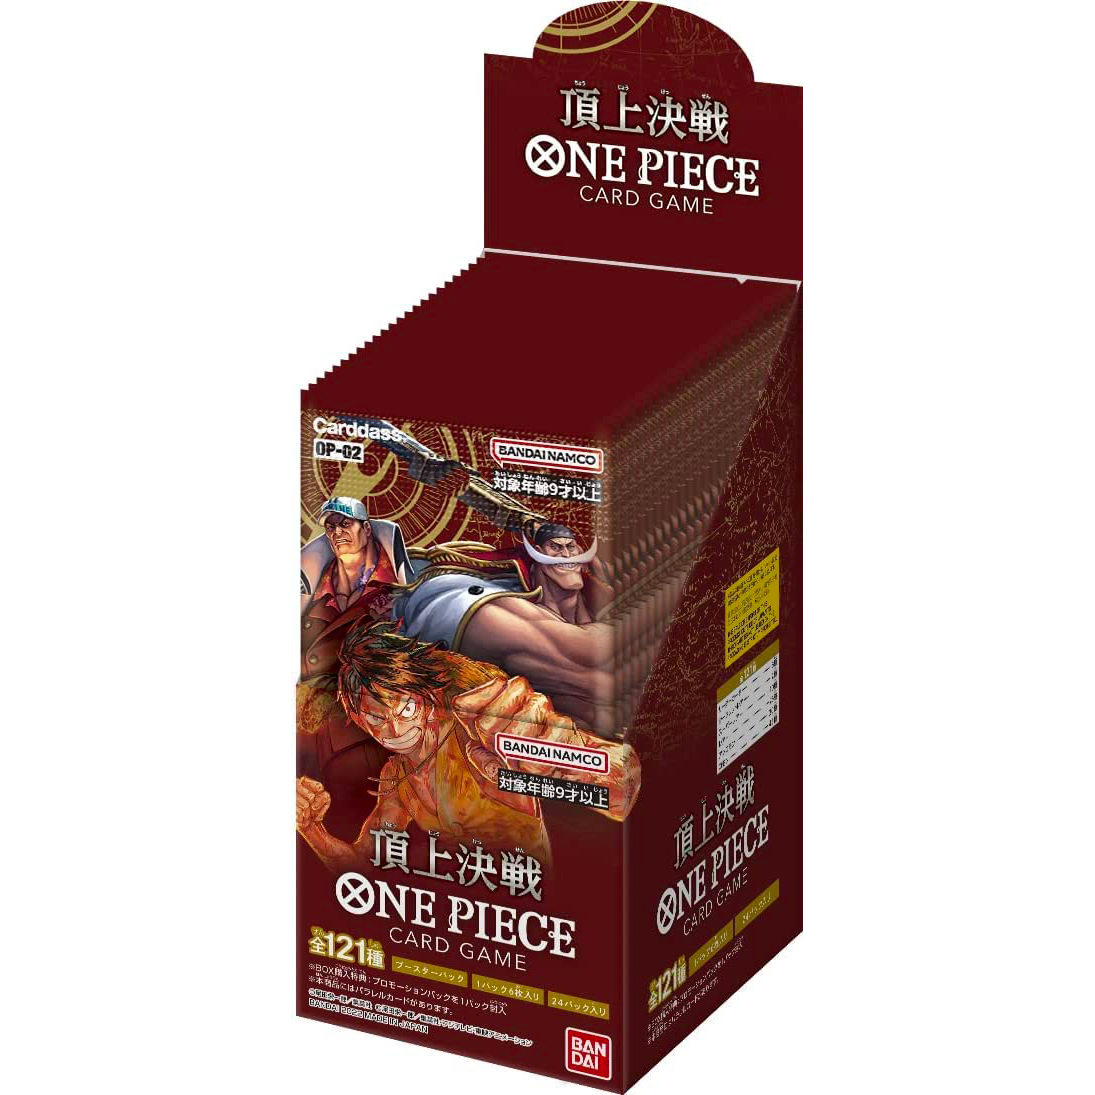 [OP-02] ONE PIECE CARD GAME Booster Pack ｢PARAMOUNT WAR｣ Box  Release date: November 4 2022  24 packs / Box  6 cards / Booster pack japan japanses cardotaku cardotaku.com